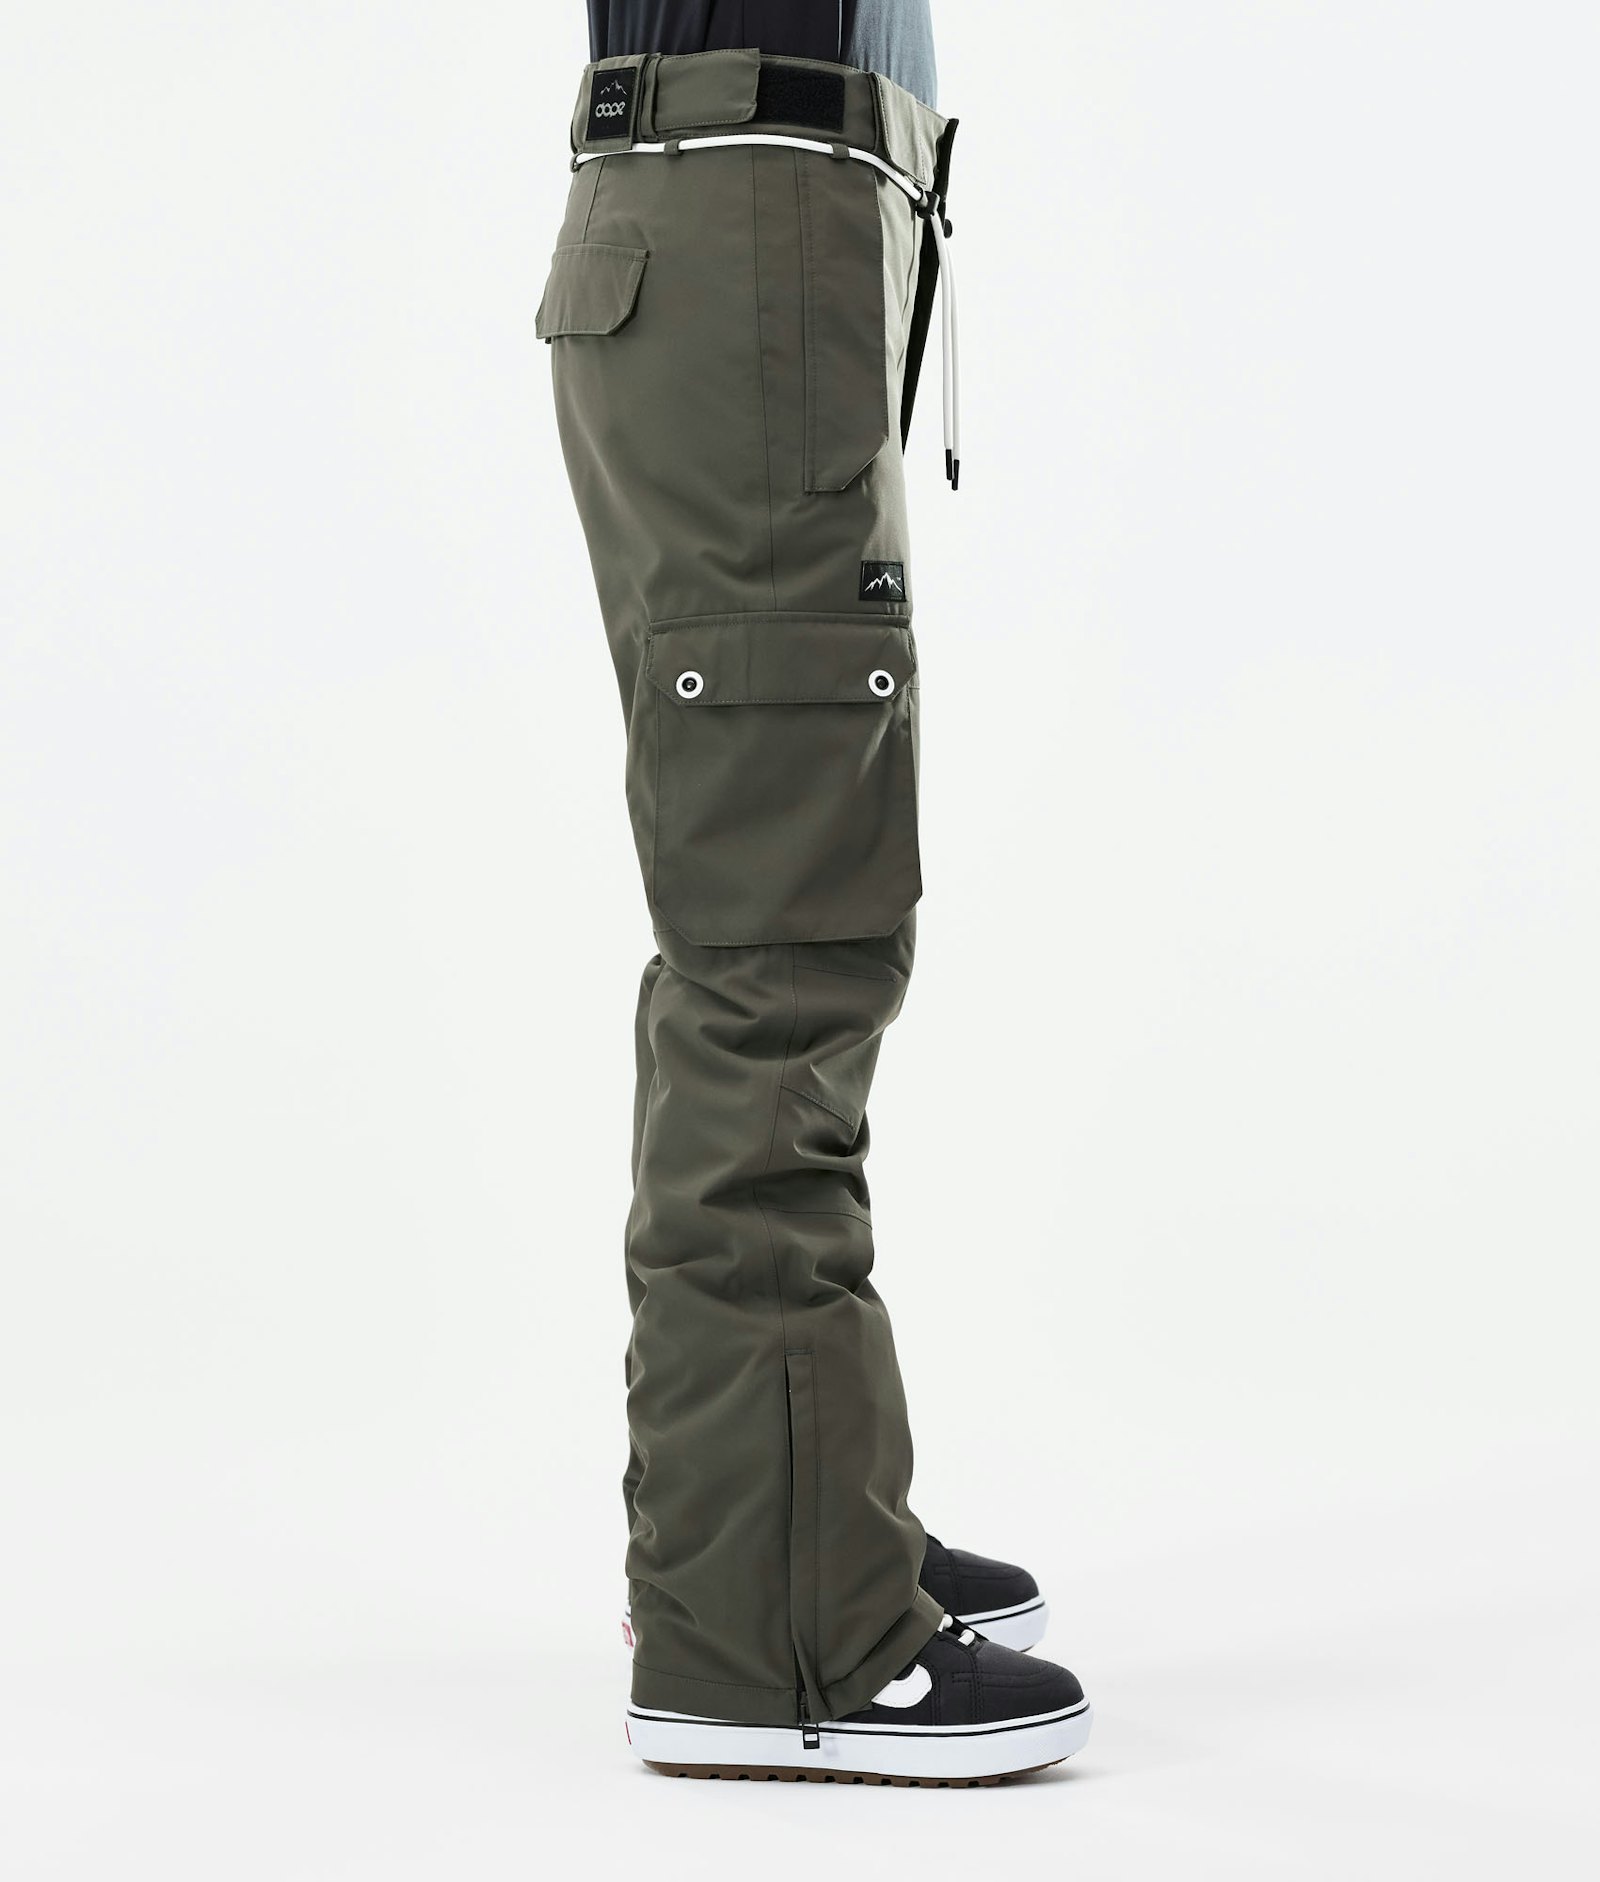 Iconic W 2021 Snowboard Pants Women Olive Green, Image 2 of 6